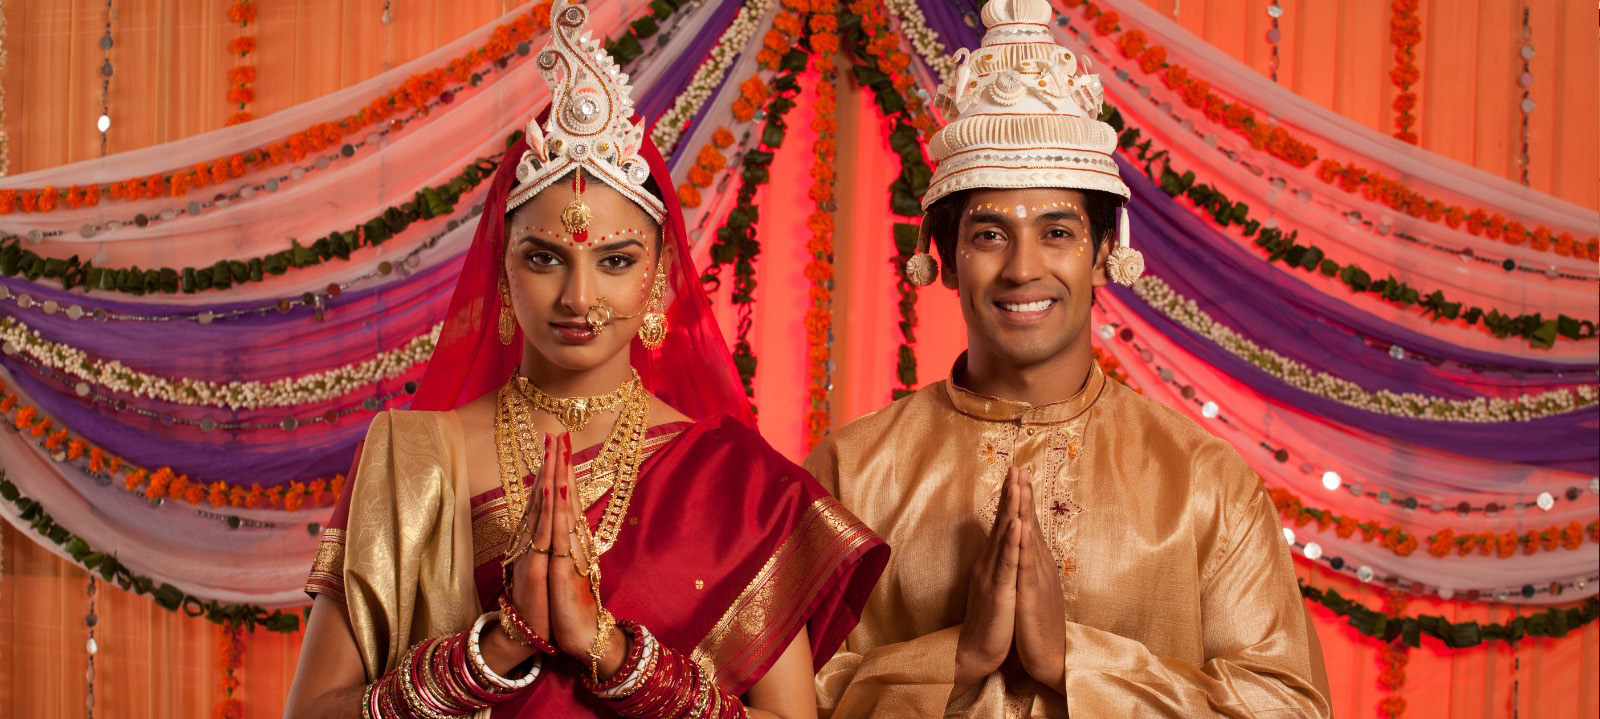 A new edge of Indian Wedding